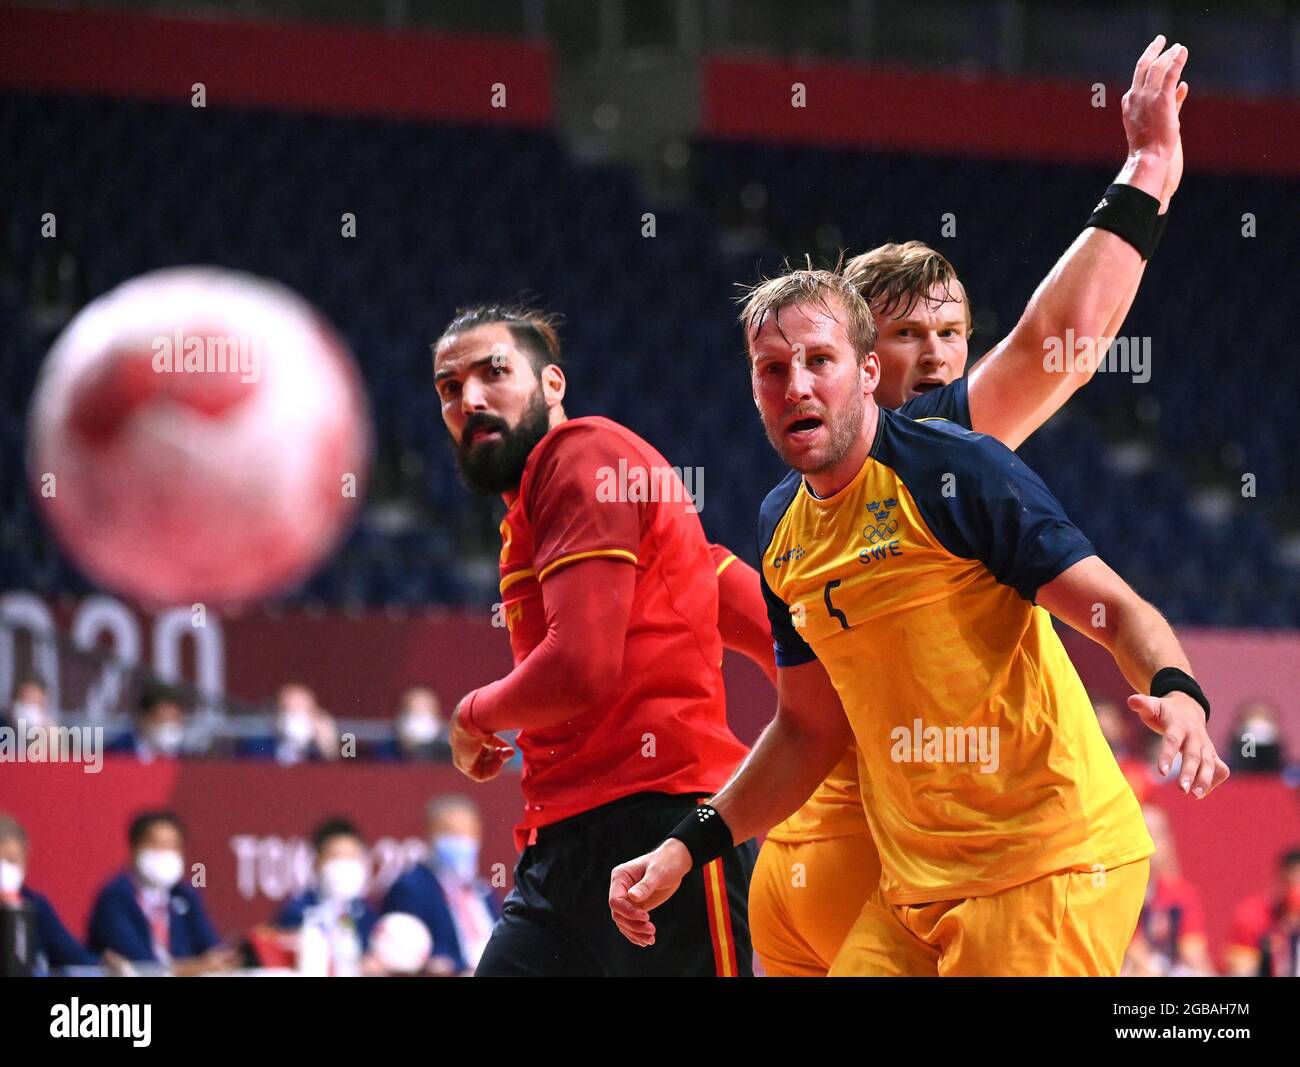 Tokyo, Japan. 3rd Aug, 2021. Jorge Maqueda Peno (L) of Spain, Max Darj (C) and Jonathan Carlsbogard of Sweden react during the handball men's quarterfinal between Sweden and Spain at the Tokyo 2020 Olympic Games in Tokyo, Japan, Aug. 3, 2021. Credit: Guo Chen/Xinhua/Alamy Live News Stock Photo